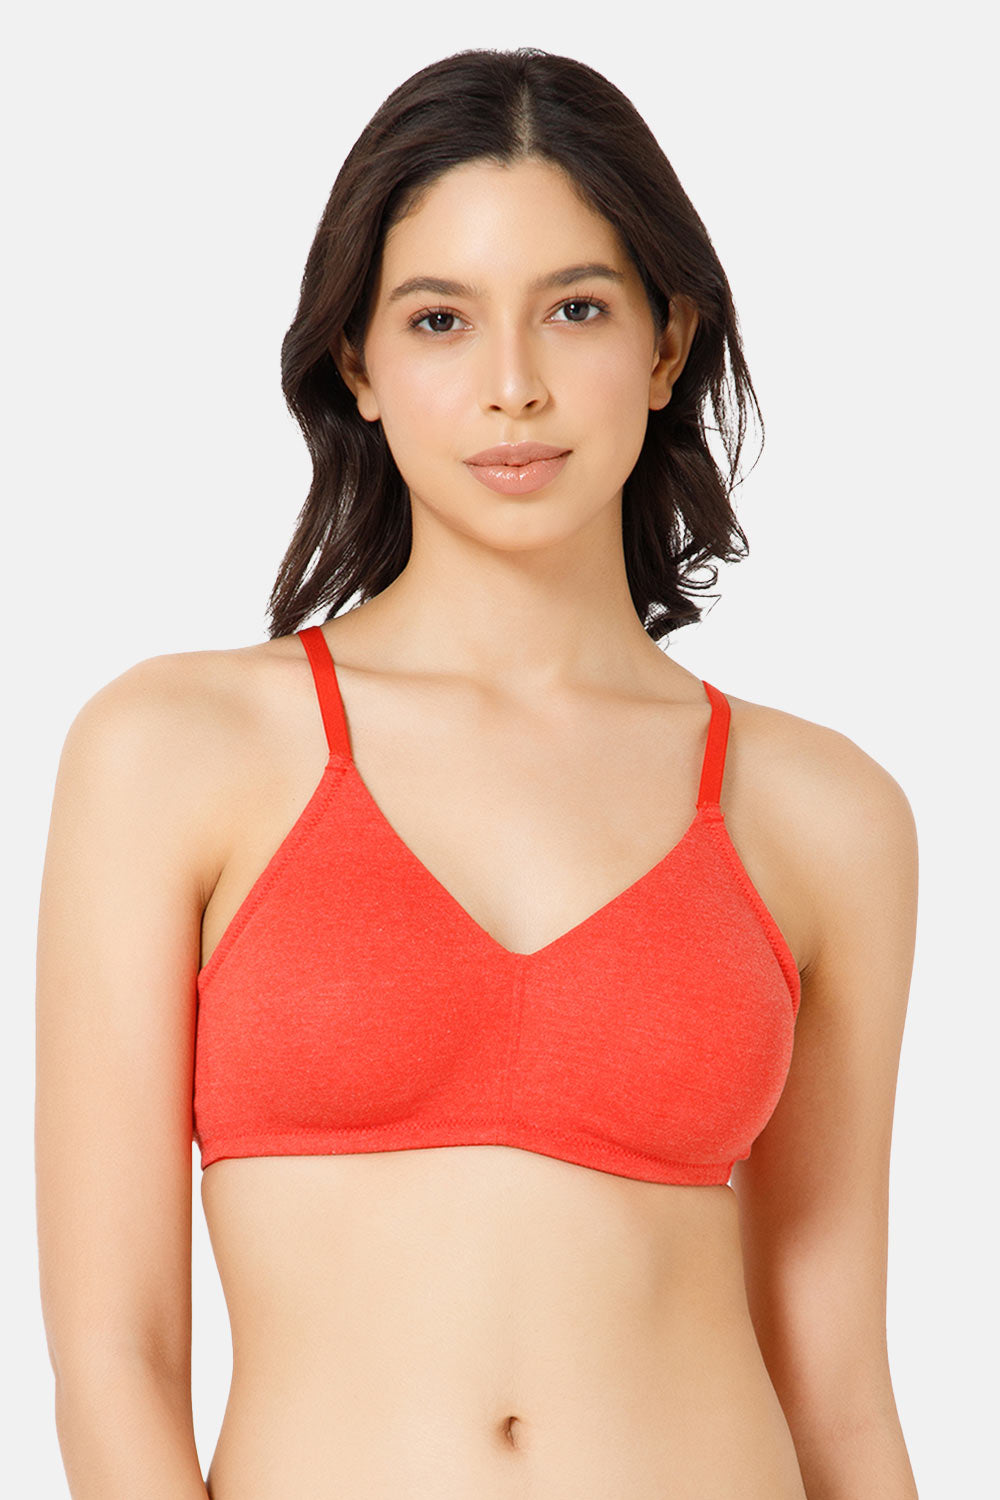 YOUNG UNDERWEAR, Women's 100% Cotton Bra, Ultimate Comfort,  Breathability, and Support